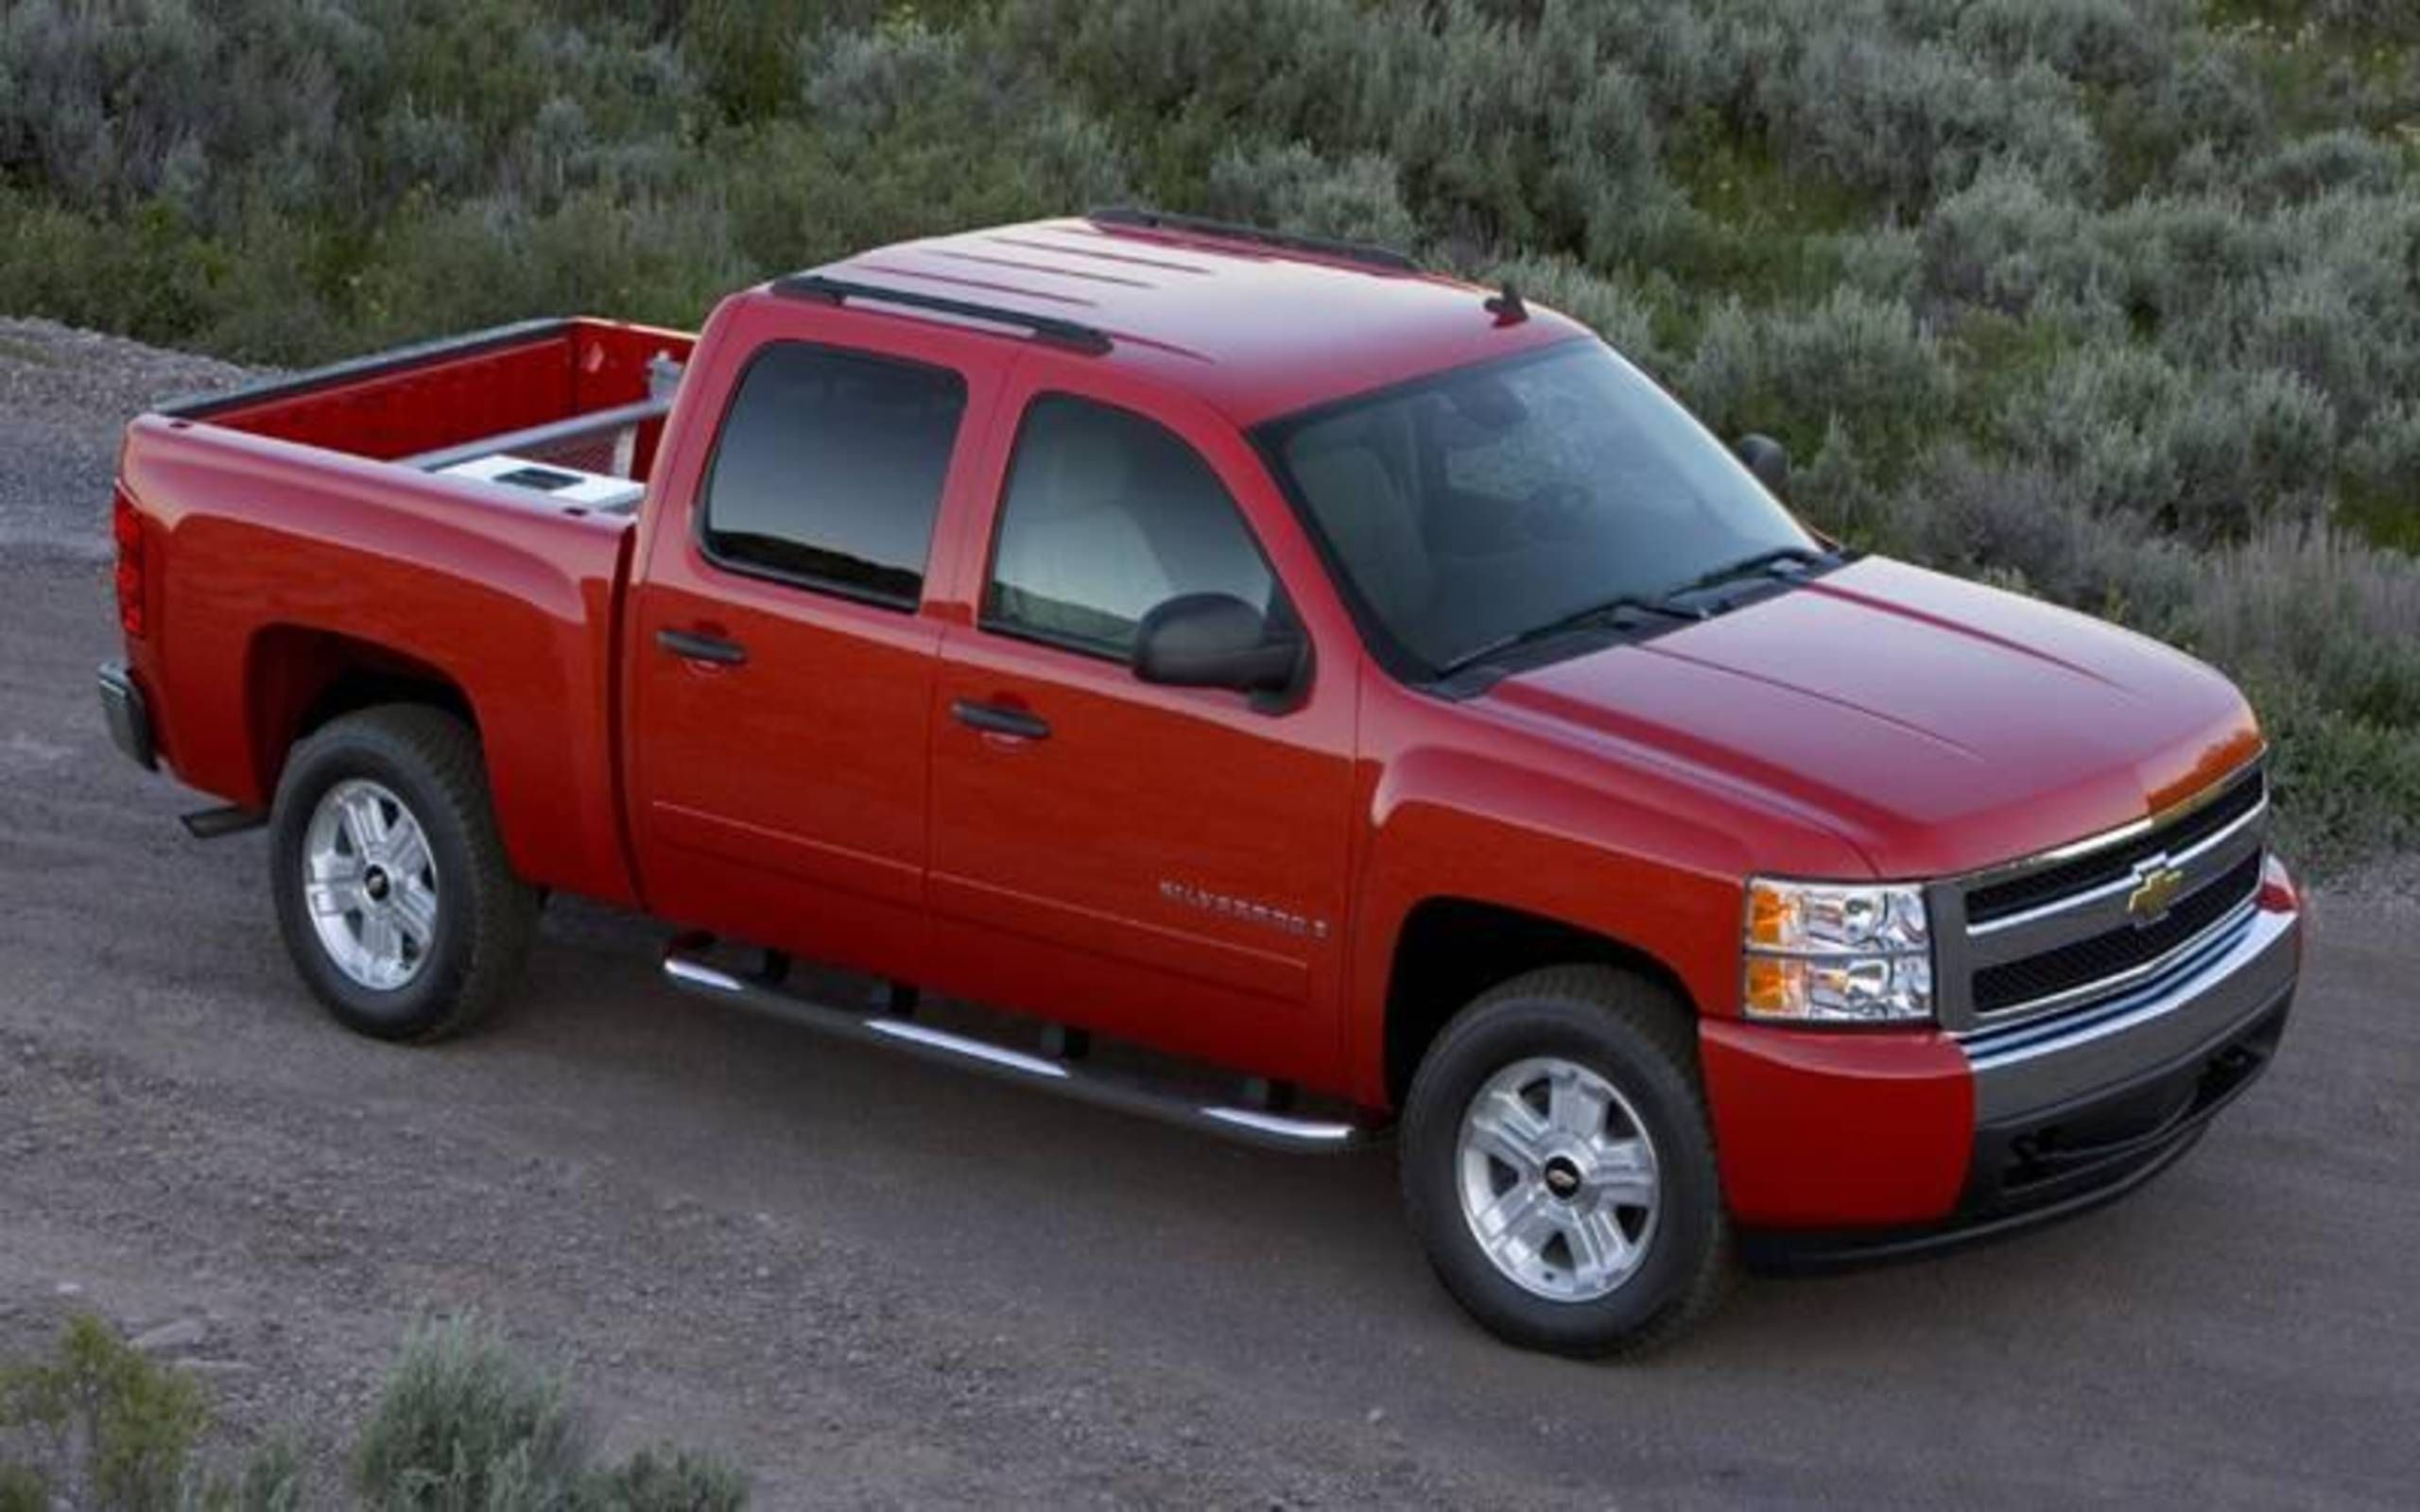 2007 Chevrolet Silverado 1500: Chevy fast-tracks truck to market and success